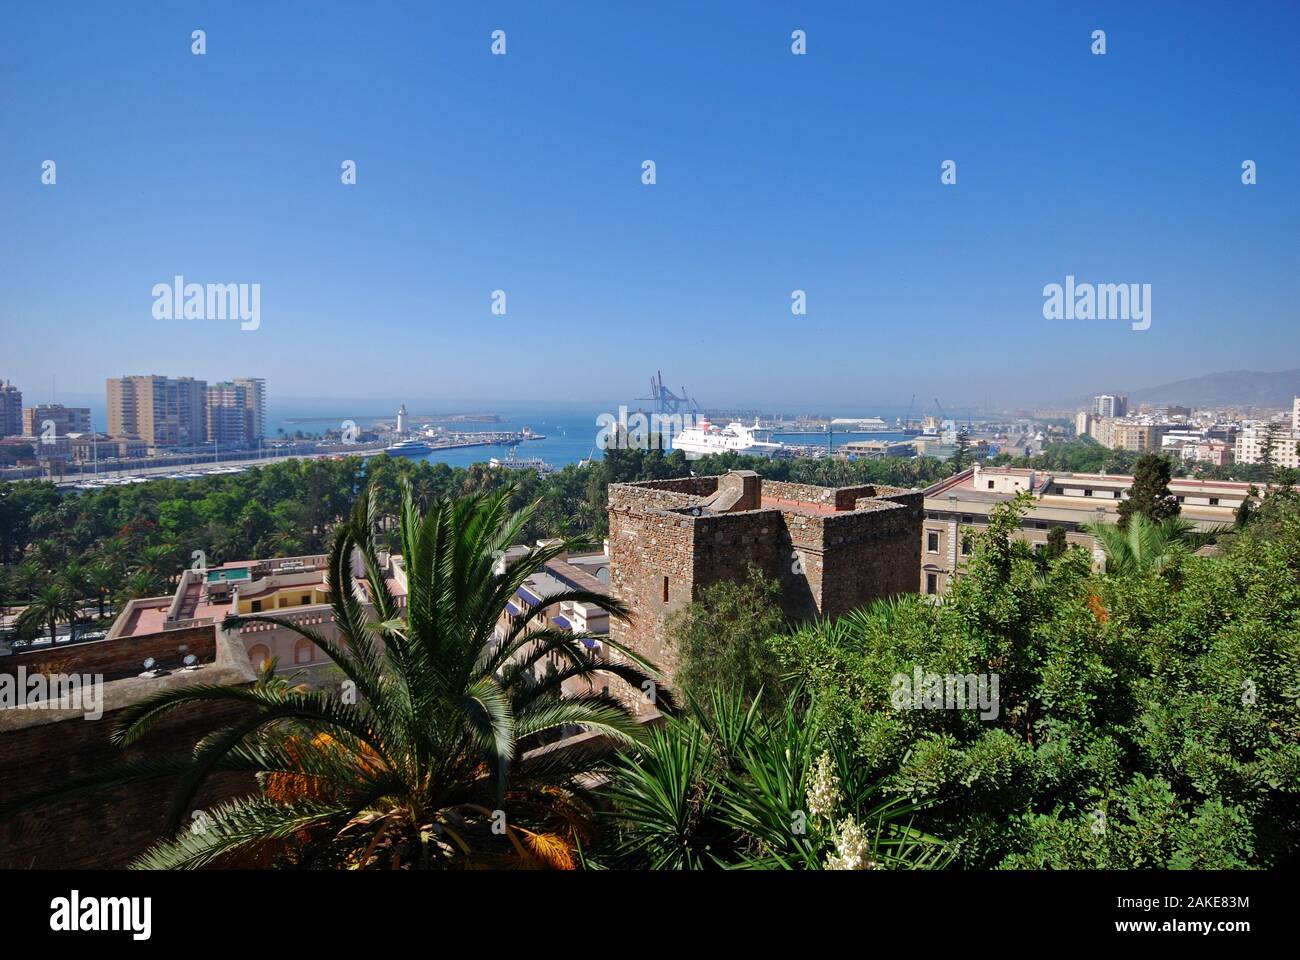 Elevated harbour view with the castle walls in the foreground, Malaga, Malaga Province, Andalucia, Spain, Western Europe. Stock Photo